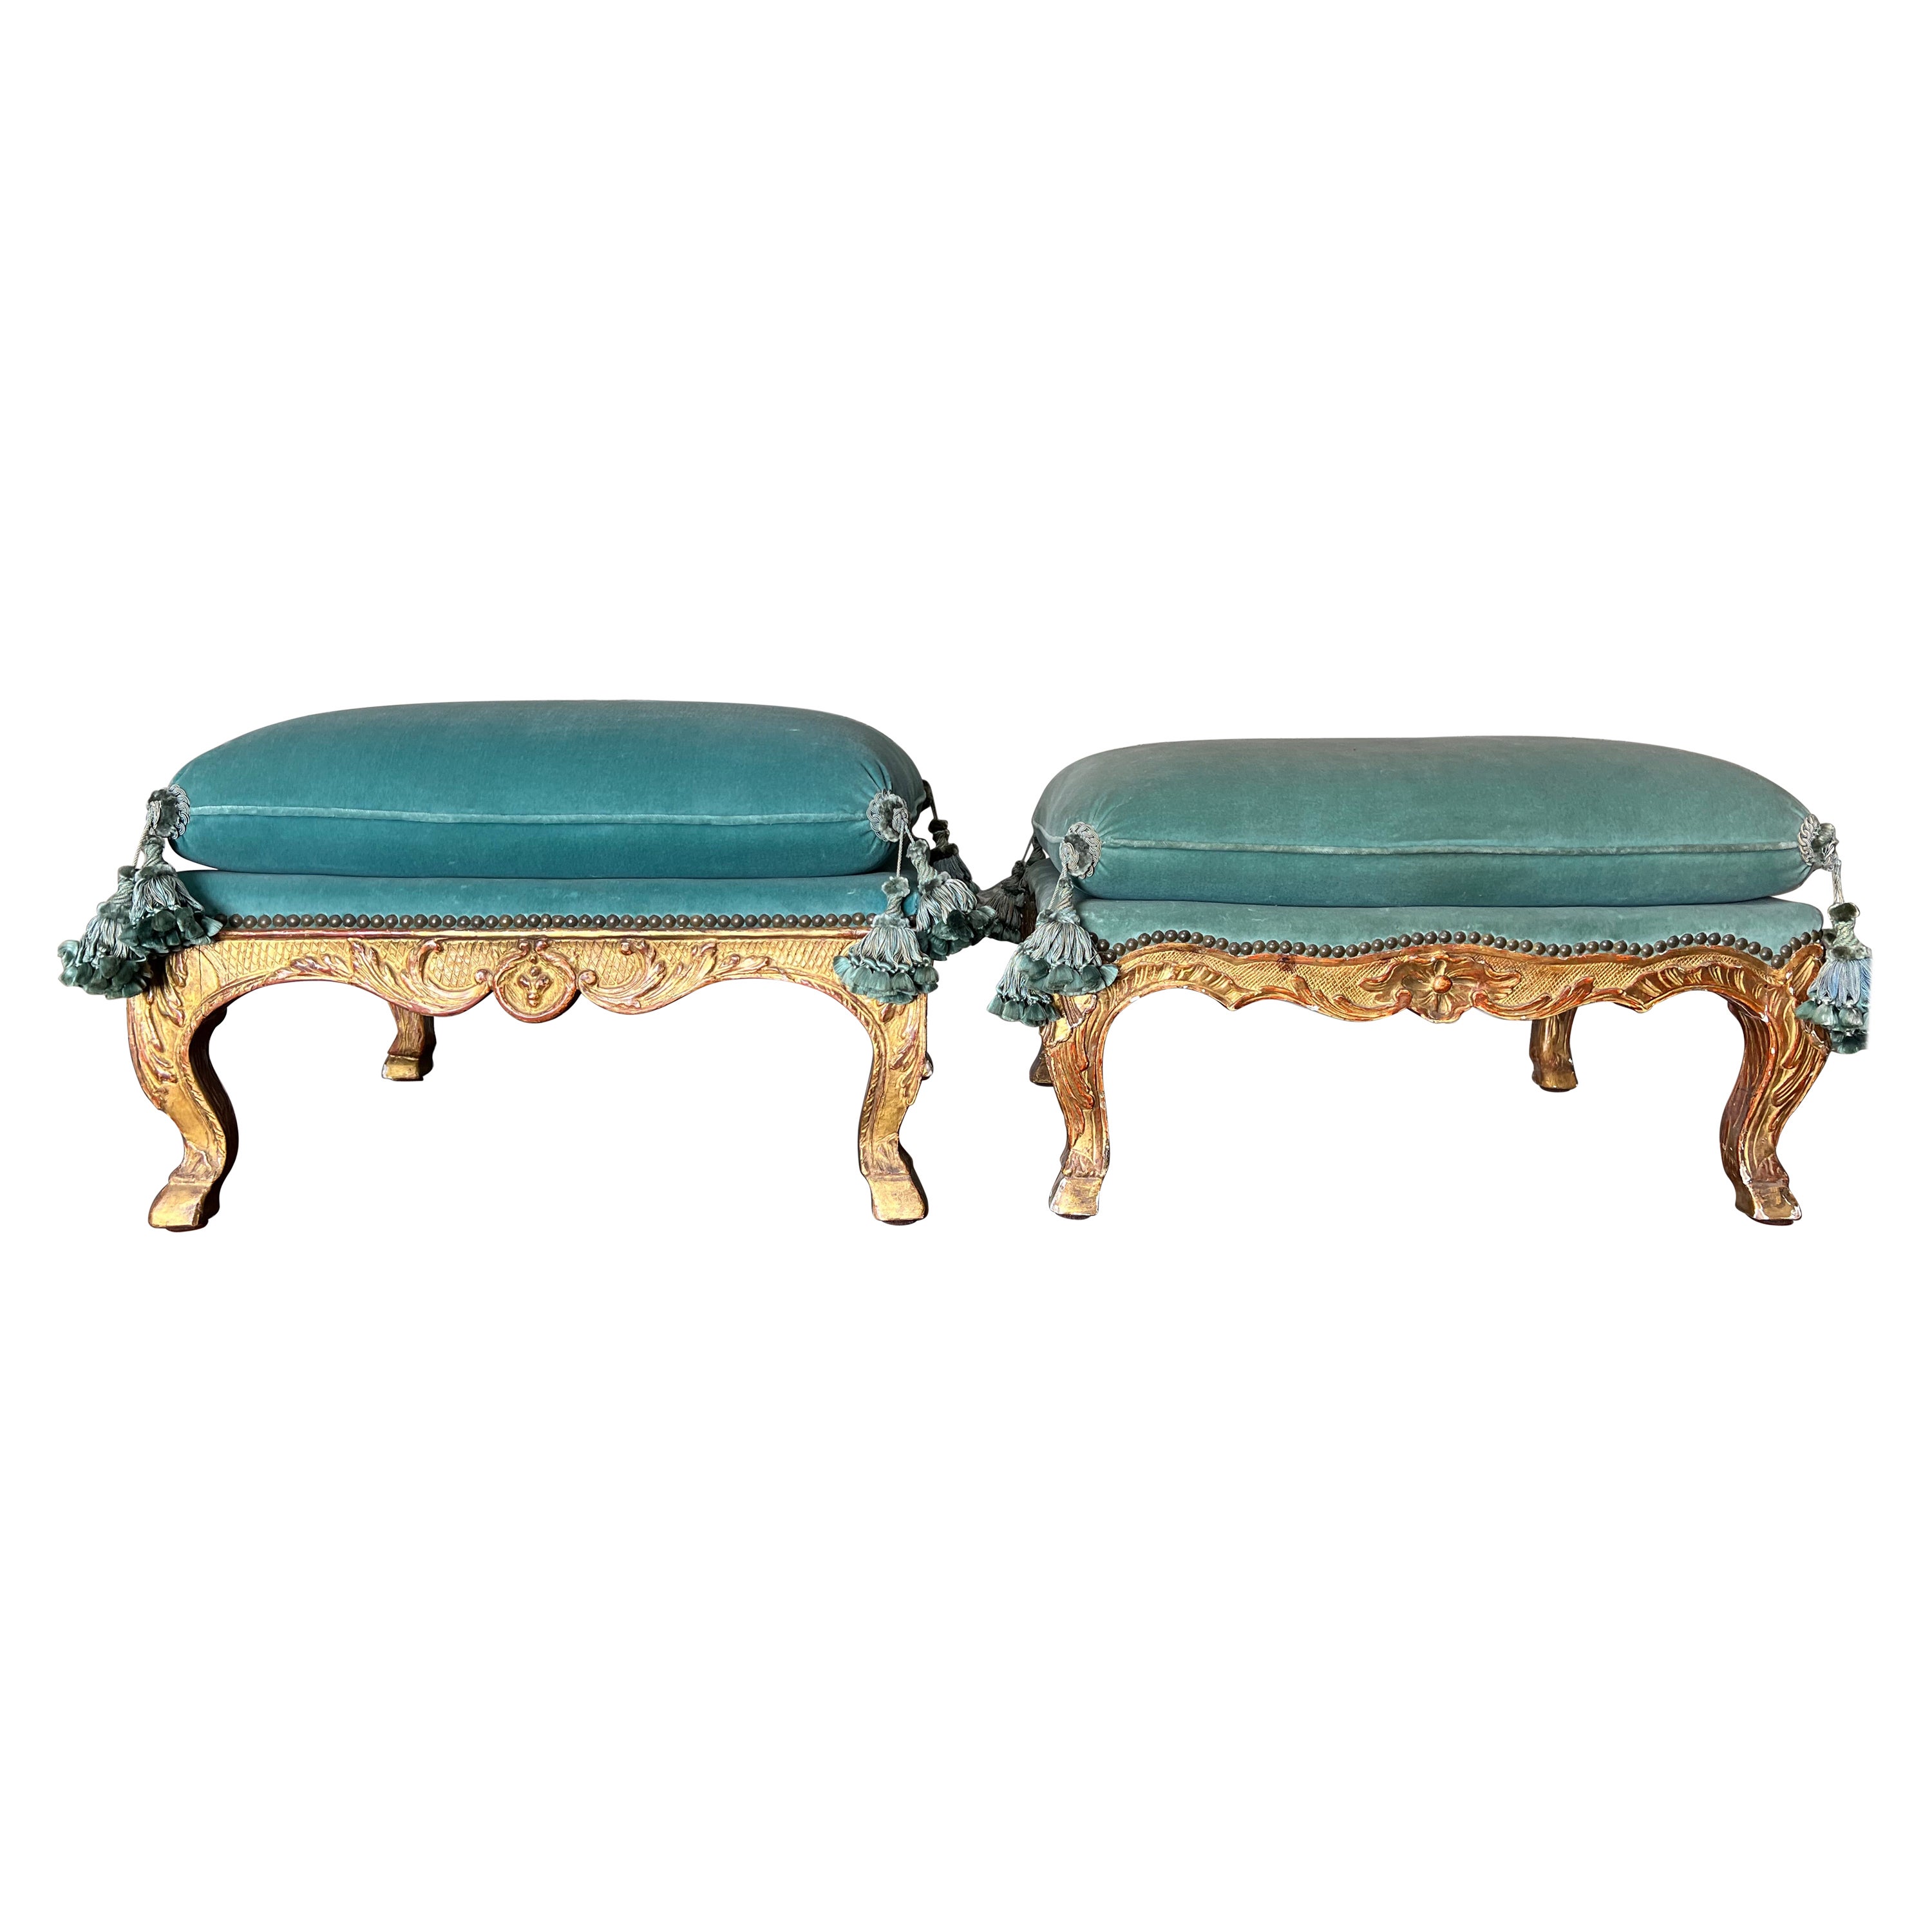 Matched Pair of 19th Century French Gilt Wood Louis XV Style Footstools